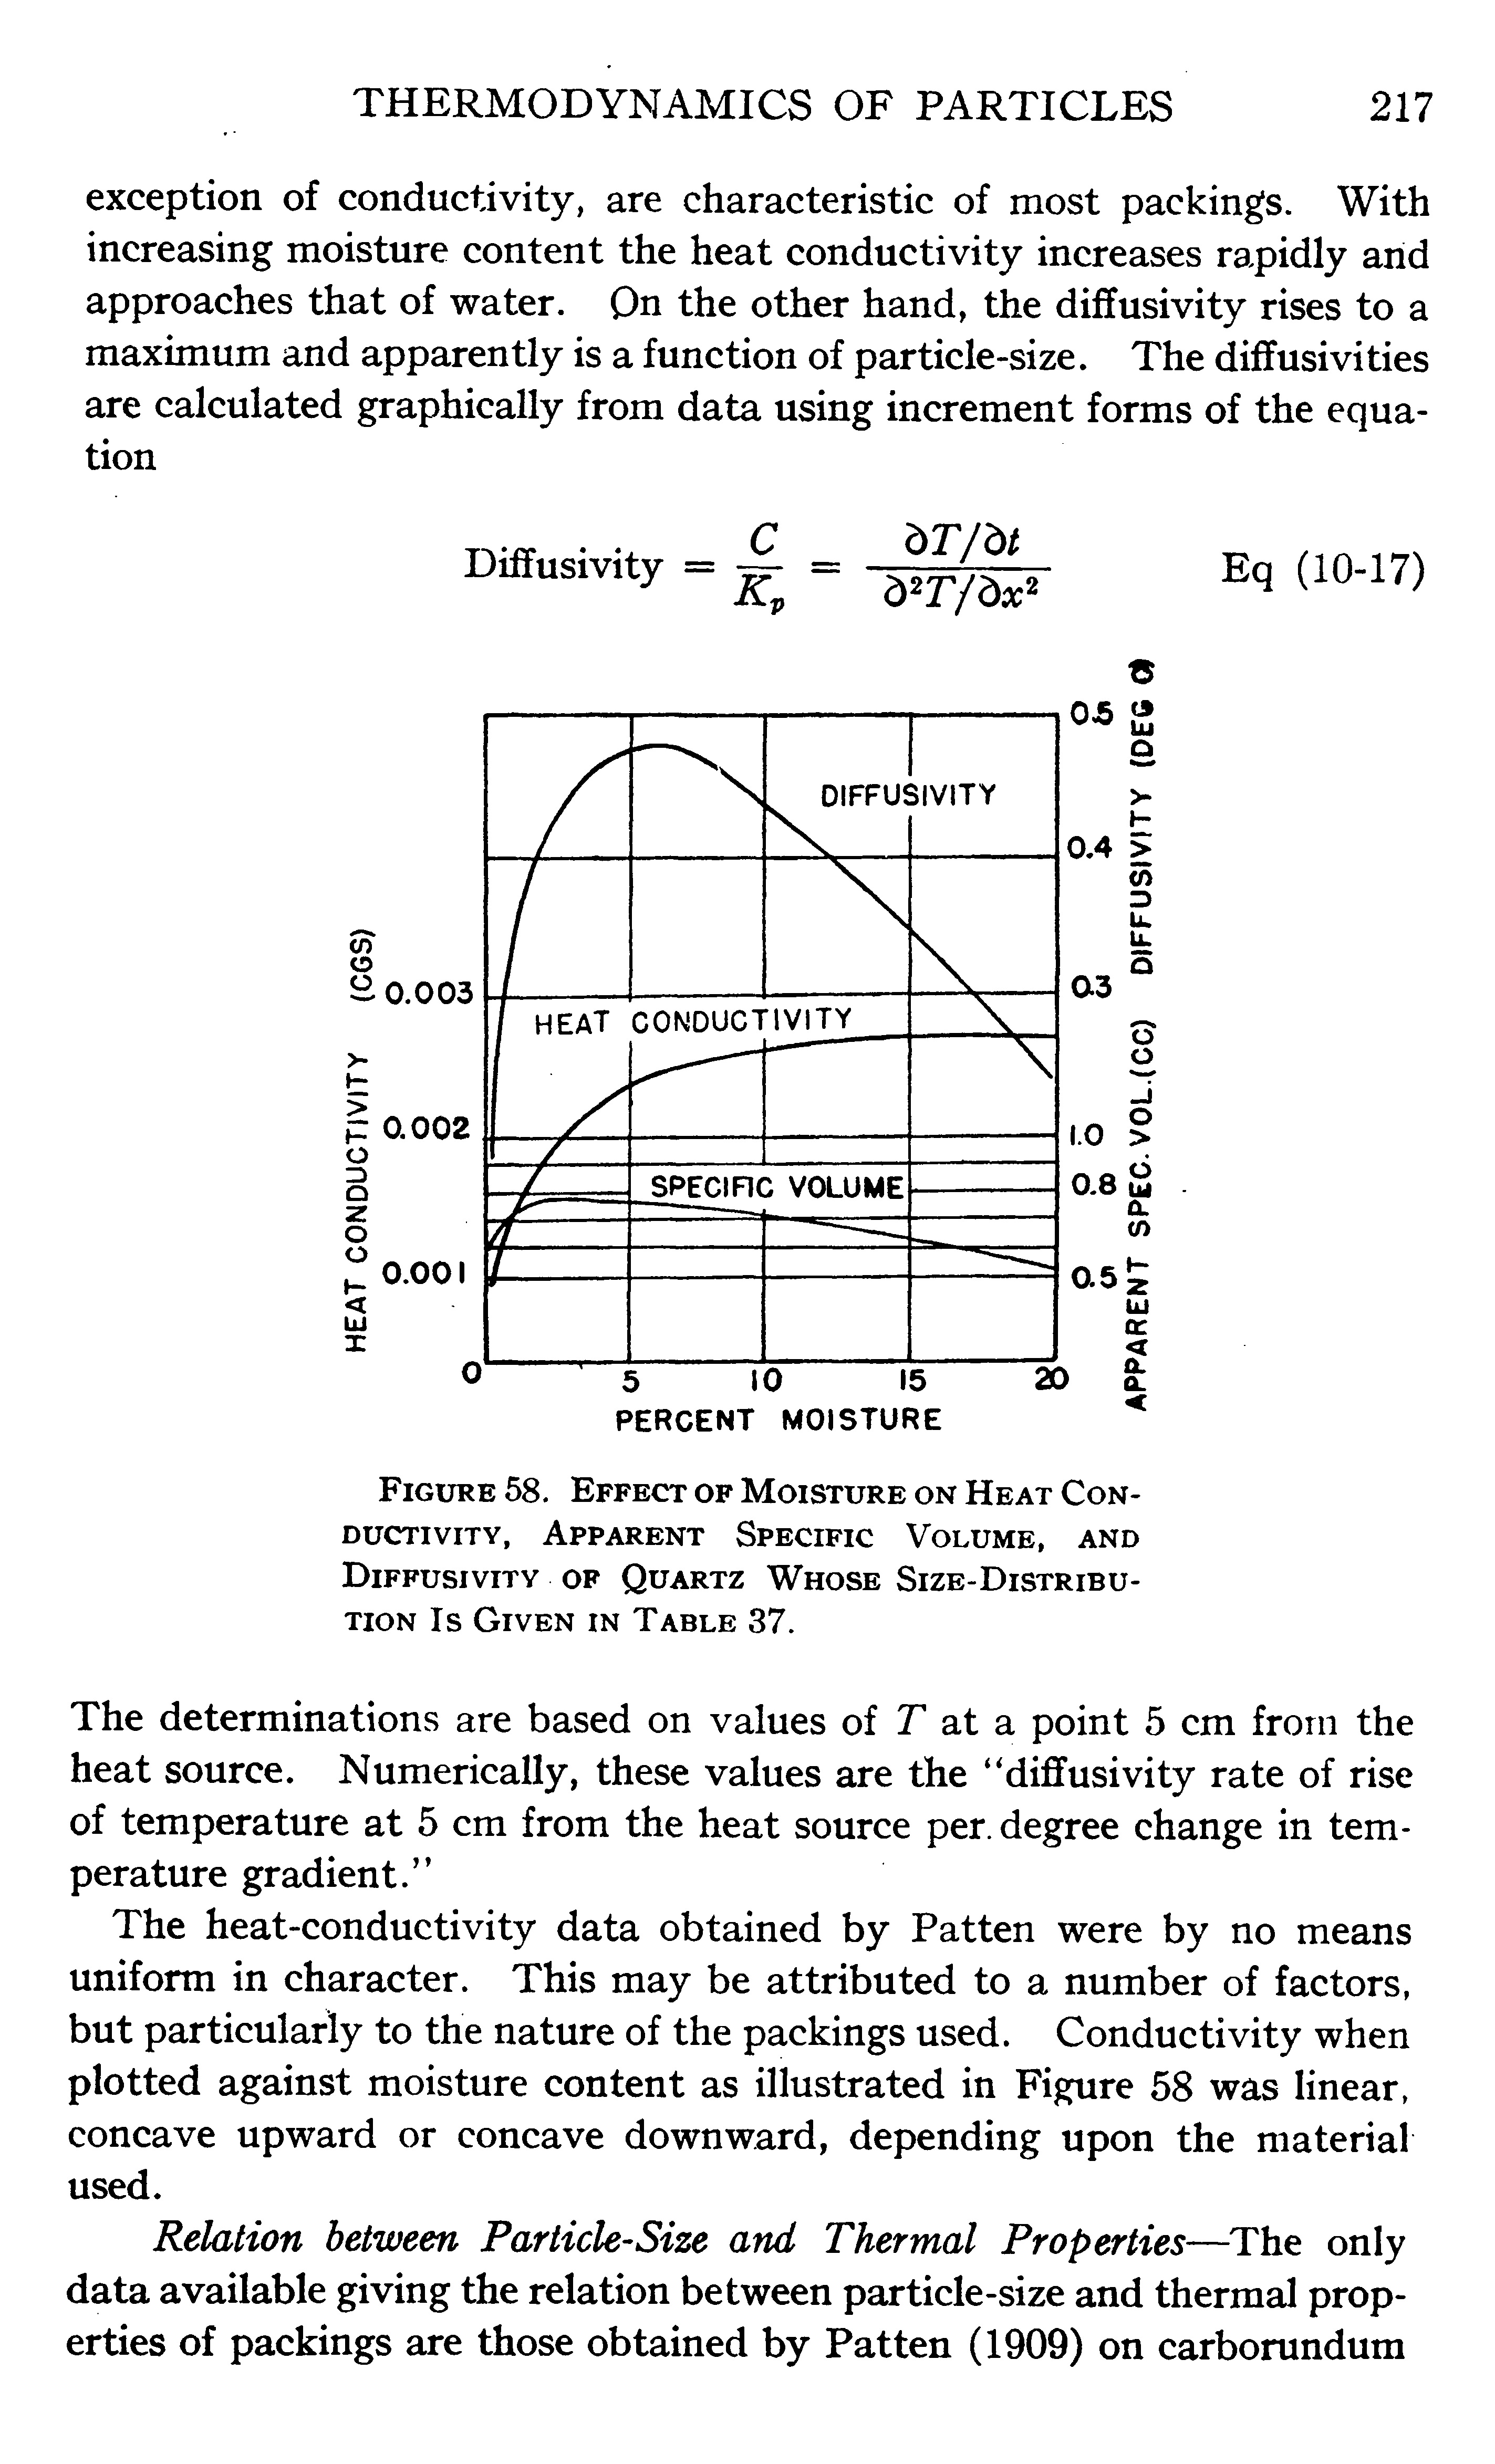 Figure 58. Effect of Moisture on Heat Conductivity, Apparent Specific Volume, and Diffusivity of Quartz Whose Size-Distribution Is Given in Table 37.